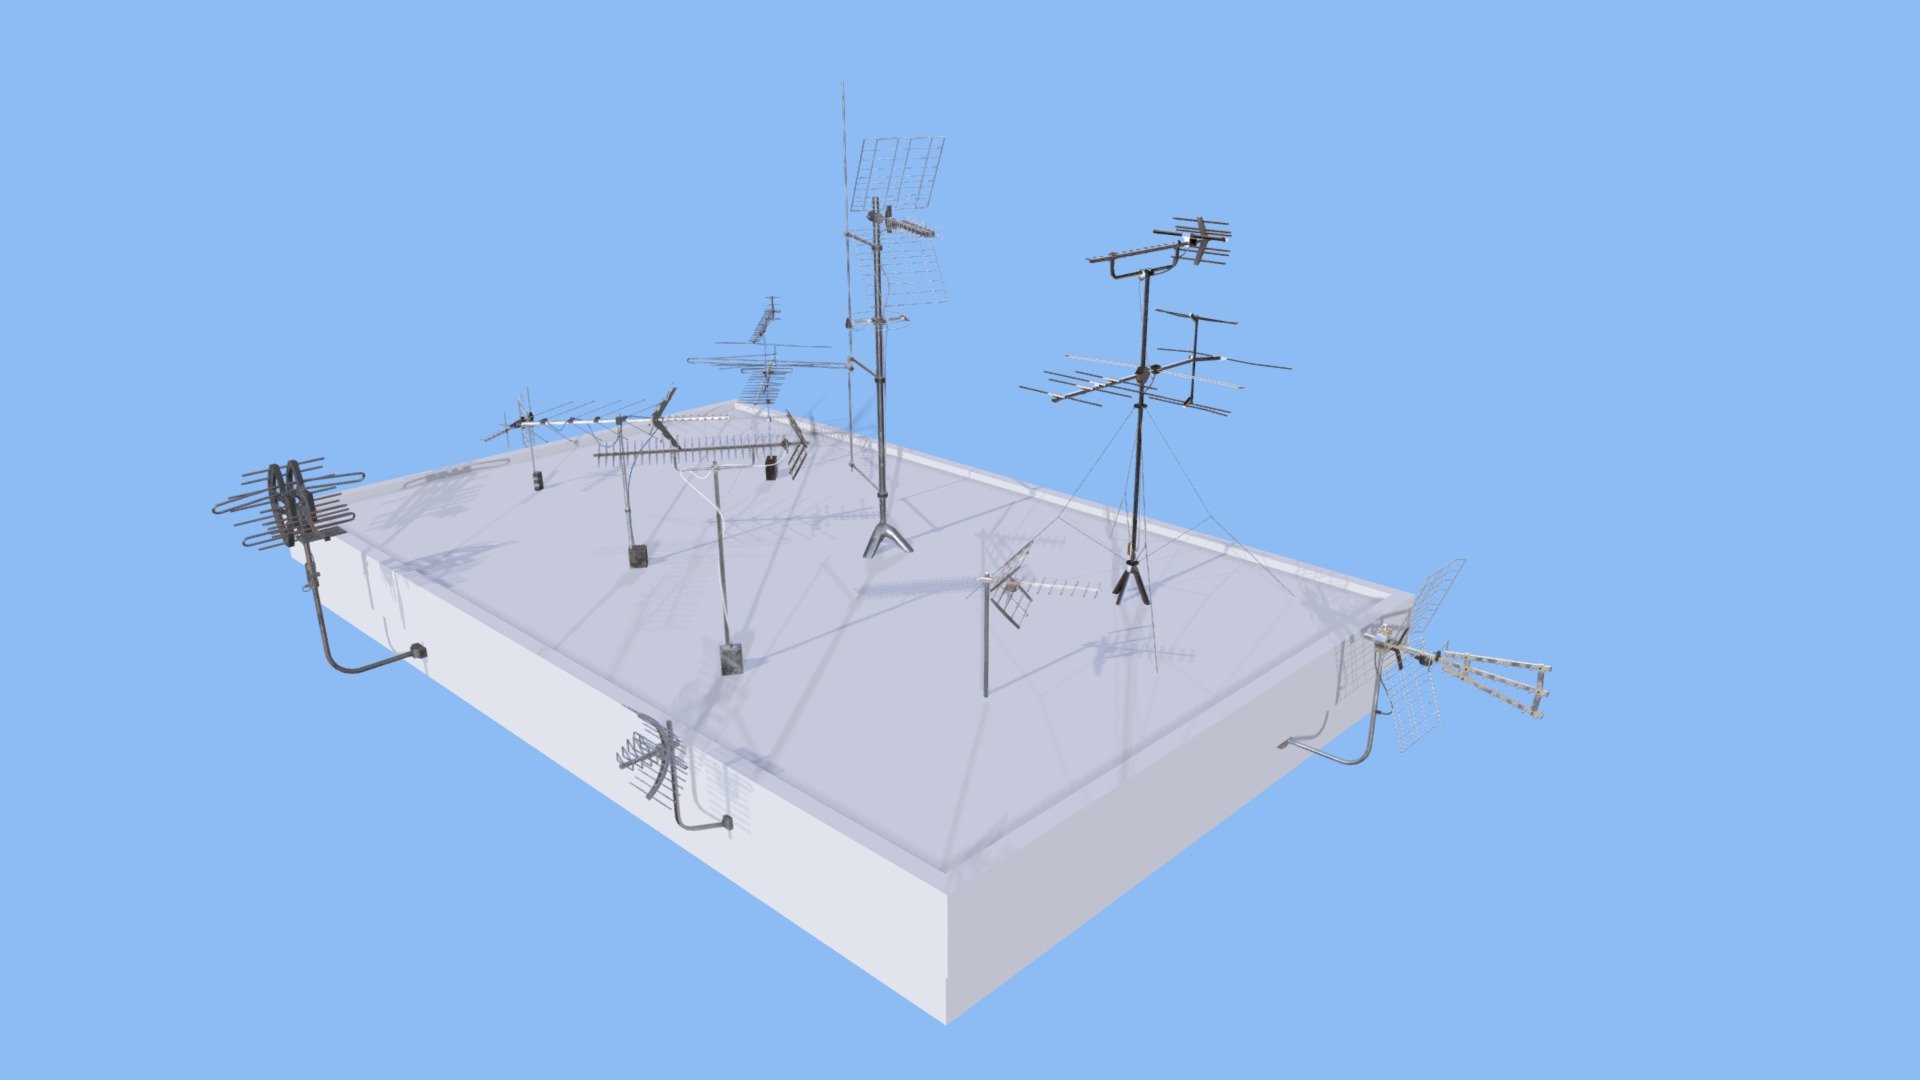 Antennas Pack - a low poly asset pack of various TV Antenna models. From small to big, great for any roof decoration.




Includes 10 models.

Models are Game-Ready/VR ready.

Models are UV mapped and unwrapped (non overlapping).

Assets are fully textured, 2048x2048 .png’s. Textures for PBR MetalRough setup.

Models are ready for Unity and Unreal game engines.

File Formats: .FBX

Additional zip file contains all the files 3d model